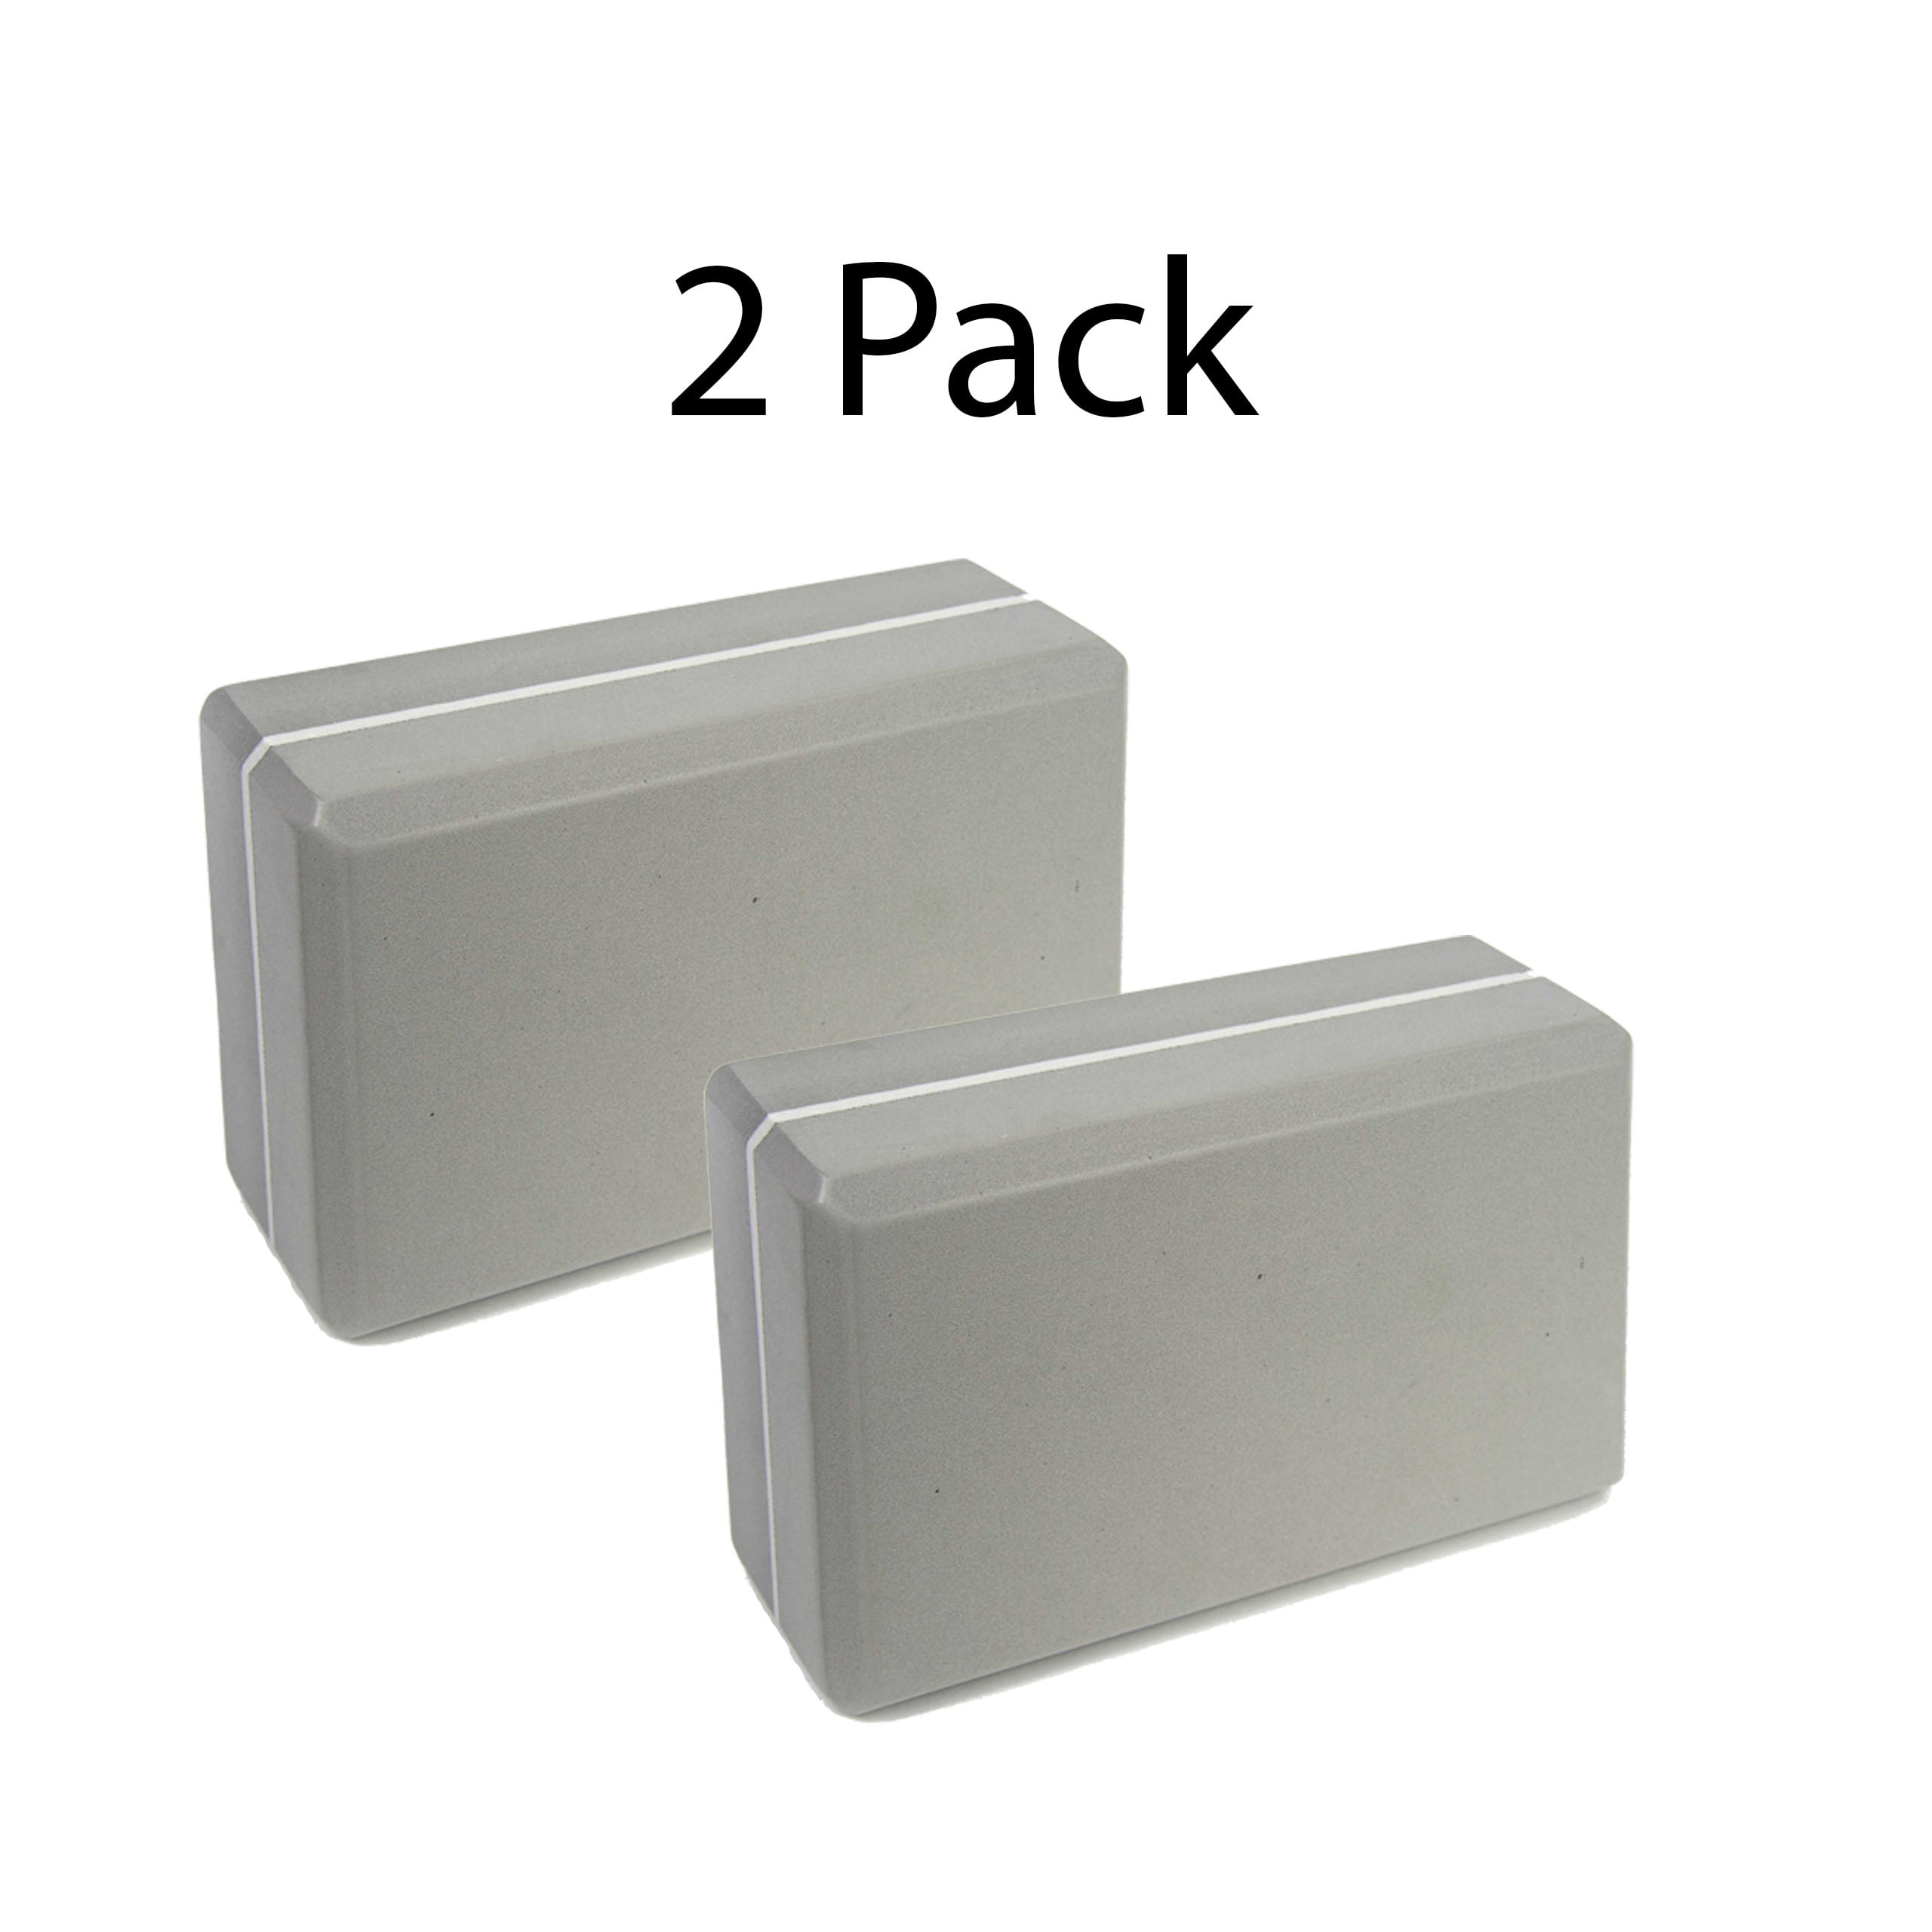 Yoreeto Yoga Block 2 Pack and High Density EVA Foam Yoga Brick to Support and Deepen Poses 